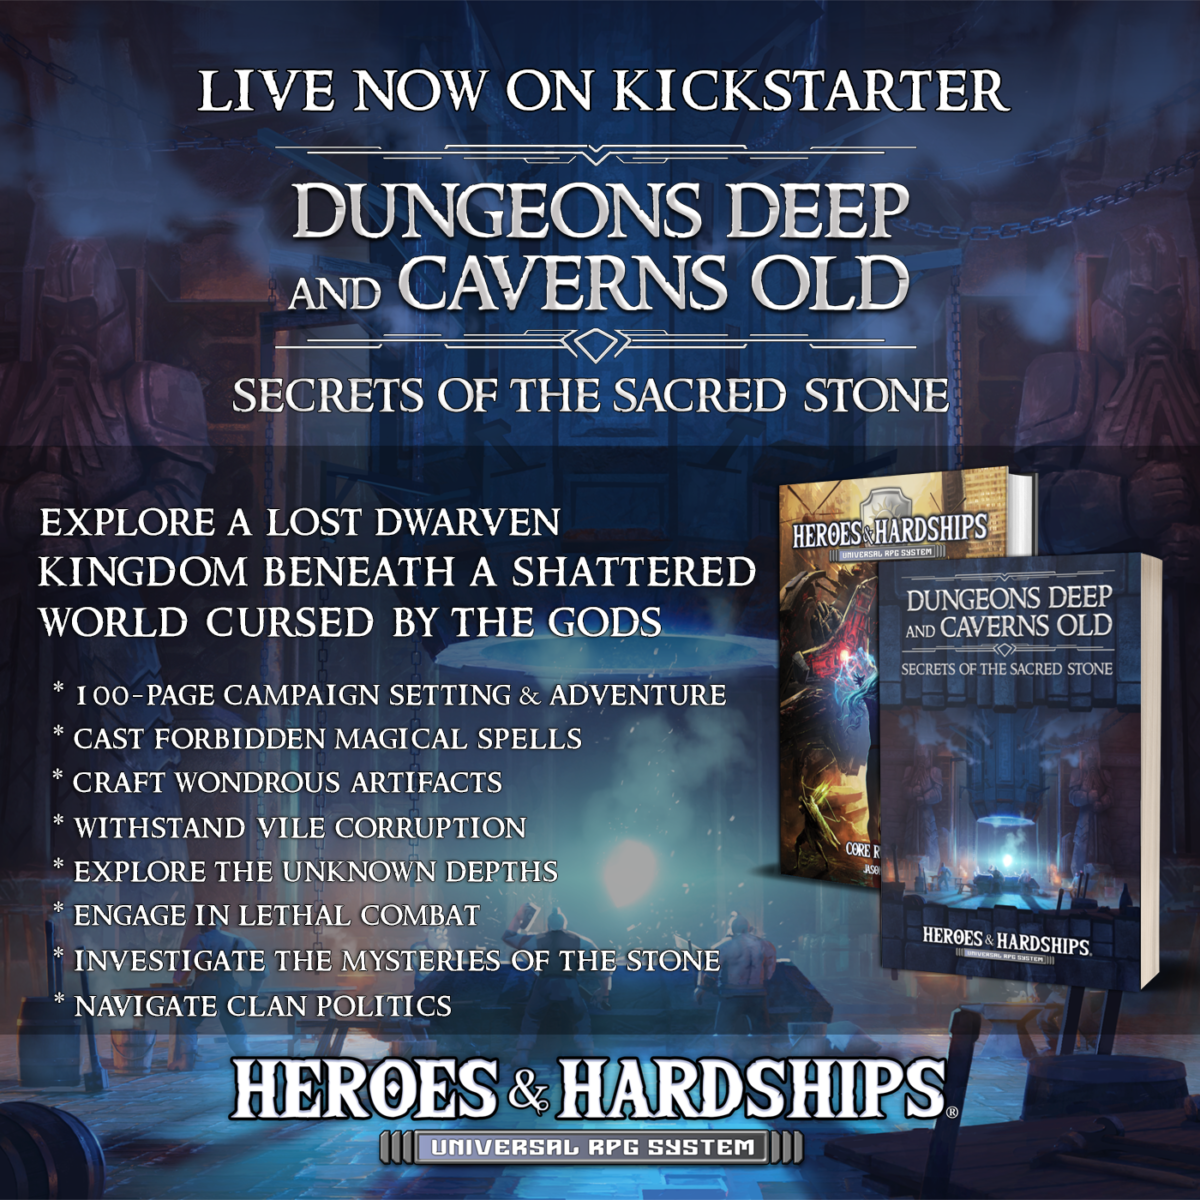 Live Now On Kickstarter. Dungeons Deep And Caverns Old Secrets Of The Sacred Stone. Explore a lost dwarven kingdom beneath a shattered world cursed by the gods. Heroes & Hardships Universal RPG System * 100-Page Campaign Setting & Adventure * Cast Forbidden Magical Spells * Craft Wondrous Artifacts * Withstand Vile Corruption * Explore The Unknown Depths * Engage In Lethal Combat * Investigate The Mysteries Of The Stone * Navigate Clan Politics (Pictures of core H&H book and this book) Blue dwarven mine background